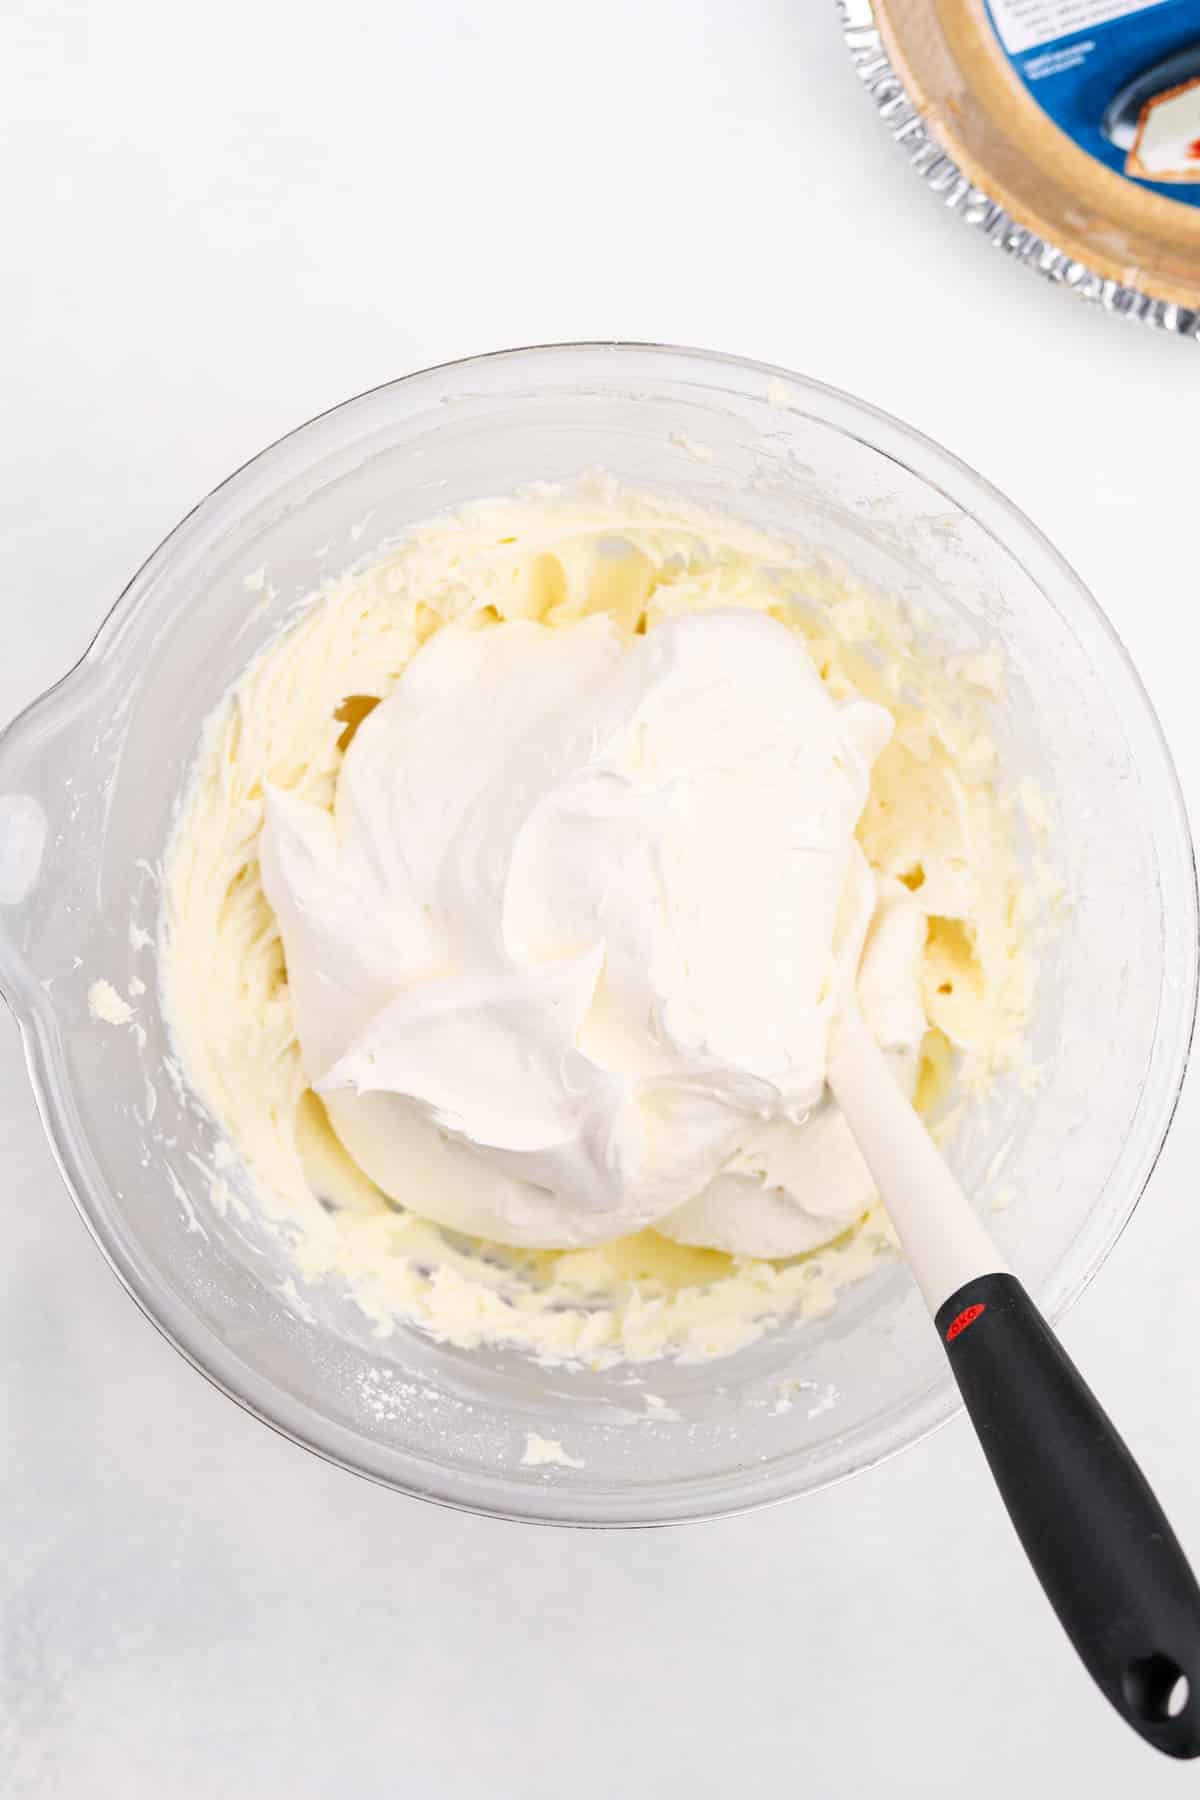 Adding thawed whipped topping to a cream cheese filling.